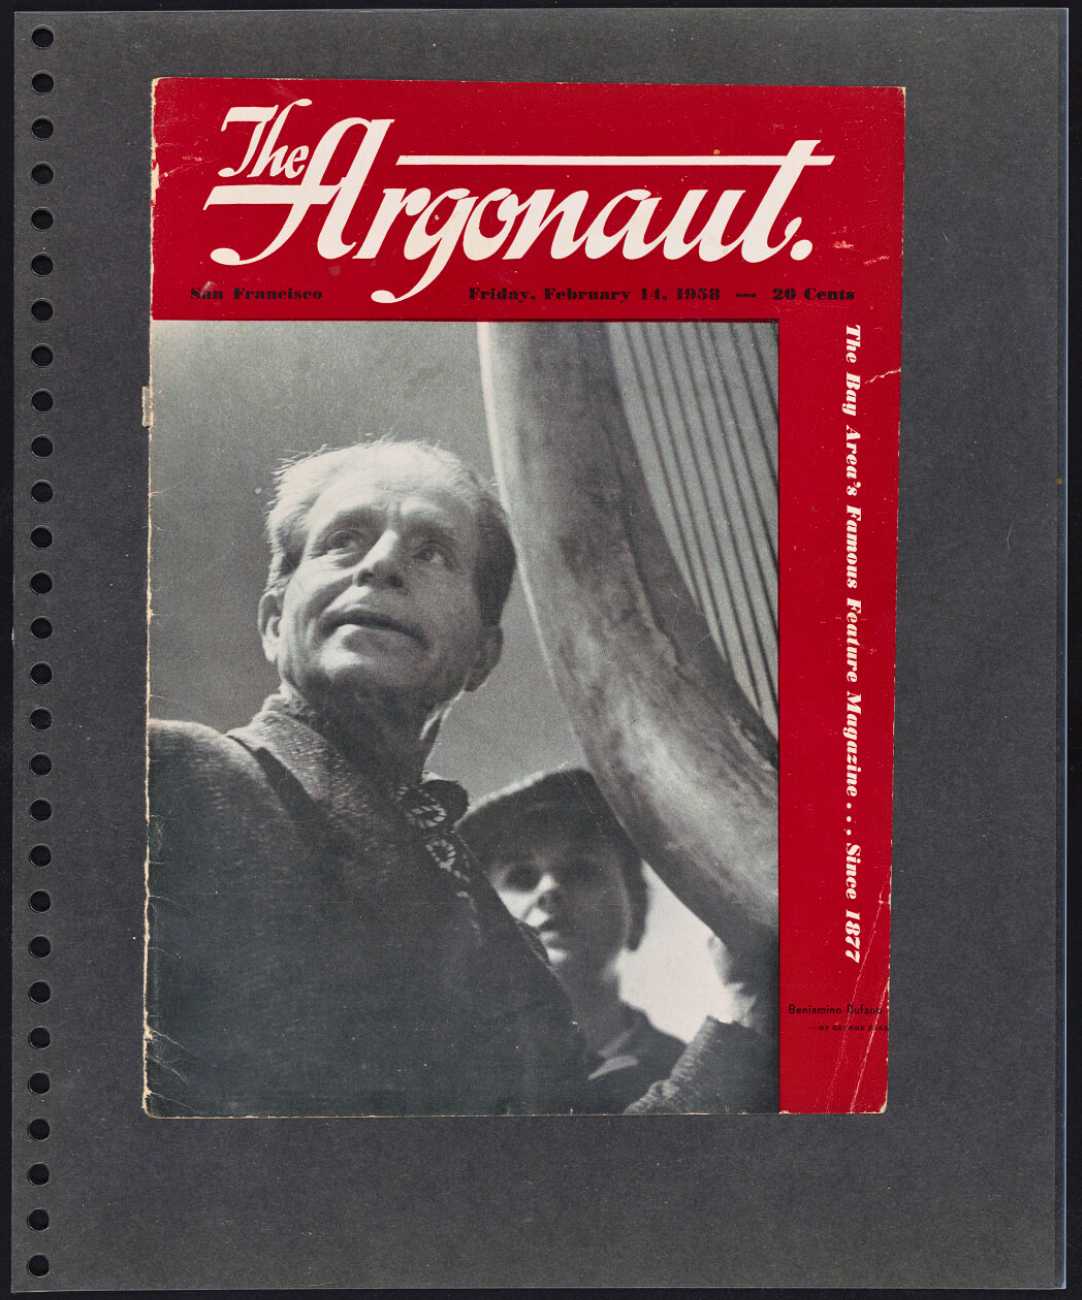 front cover of The Argonaut in 1958 shows artist, Bufano and his wife